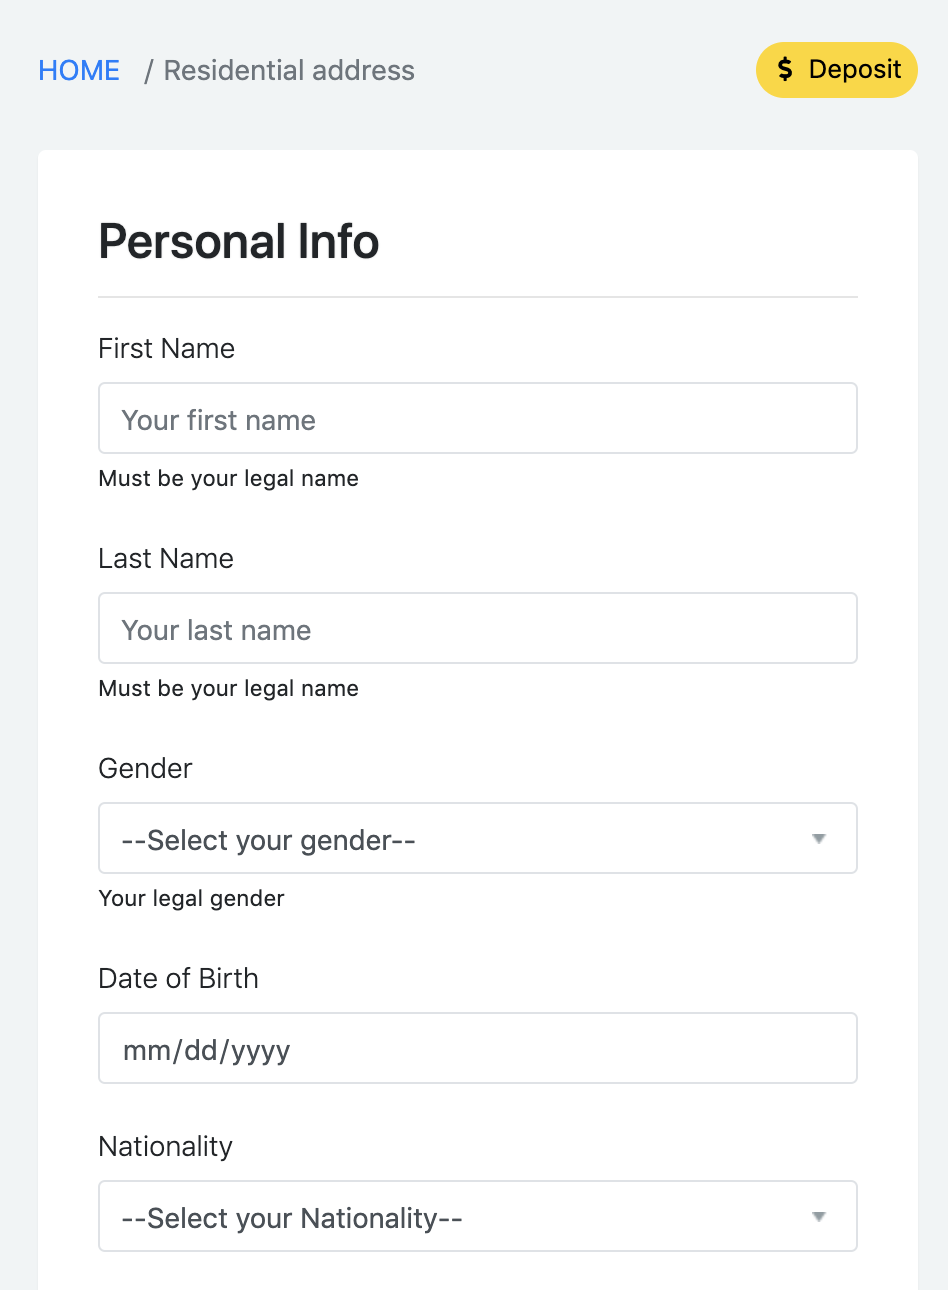 mobile version of KYC data input form at Option Pool